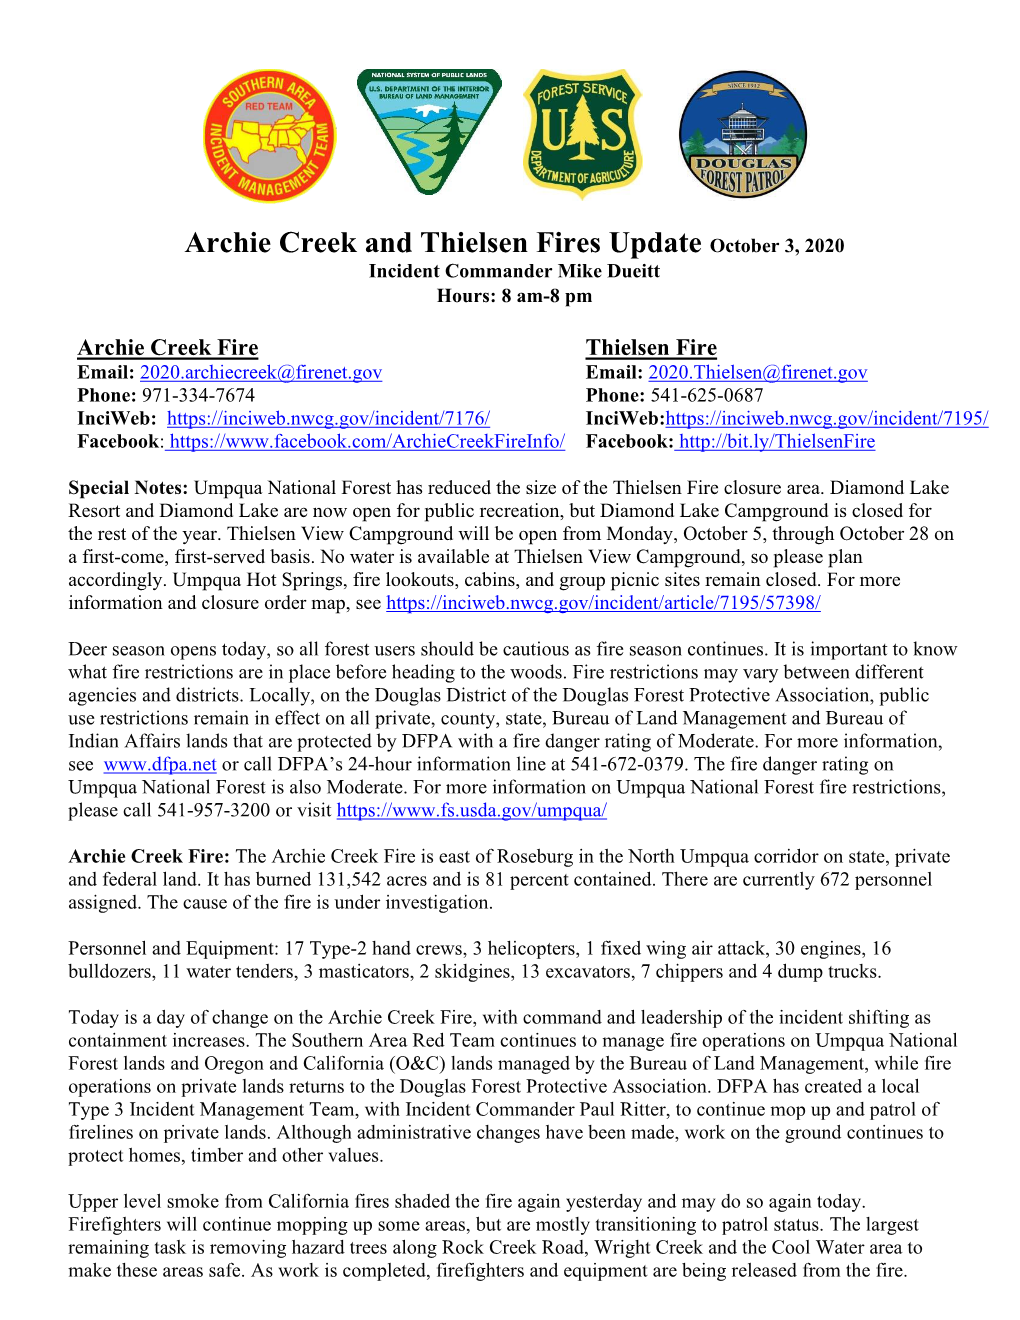 Archie Creek and Thielsen Fires Update October 3, 2020 Incident Commander Mike Dueitt Hours: 8 Am-8 Pm